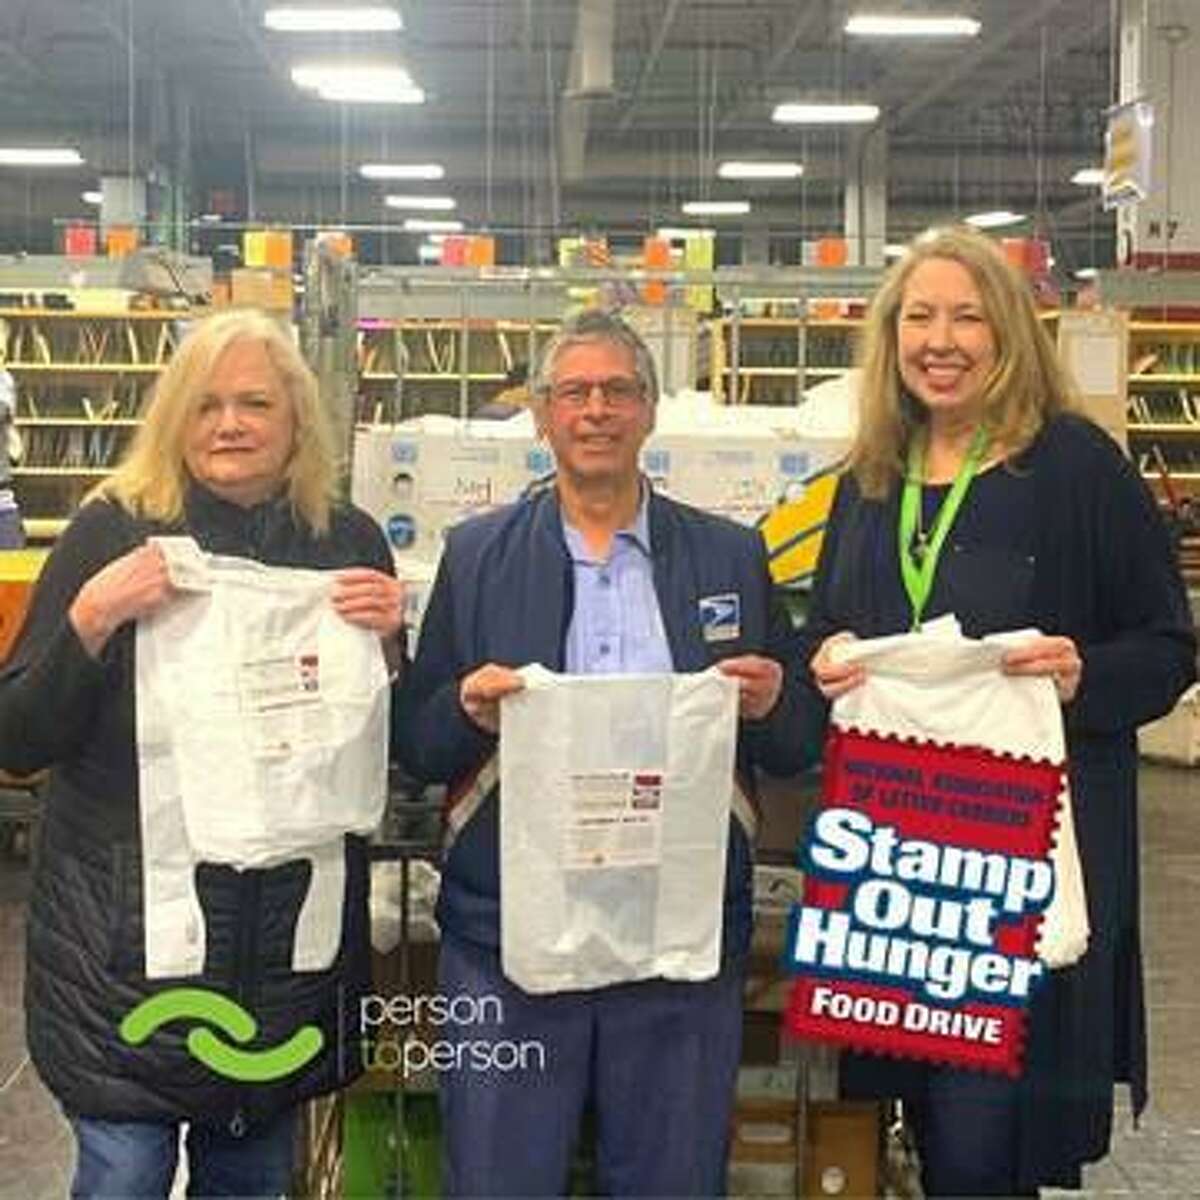 Person to Person and the National Association of Letter Carriers are teaming for the Stamp Out Hunger Postal Food Drive on Saturday. From left, Dominick Frattaroli, vice president of branch 60 of the NALC; Kate Lombardo, executive director of the Food Bank of Lower Fairfield County; and Nancy Coughlin, CEO of Person to Person, meet at the USPS sorting facility in Stamford.